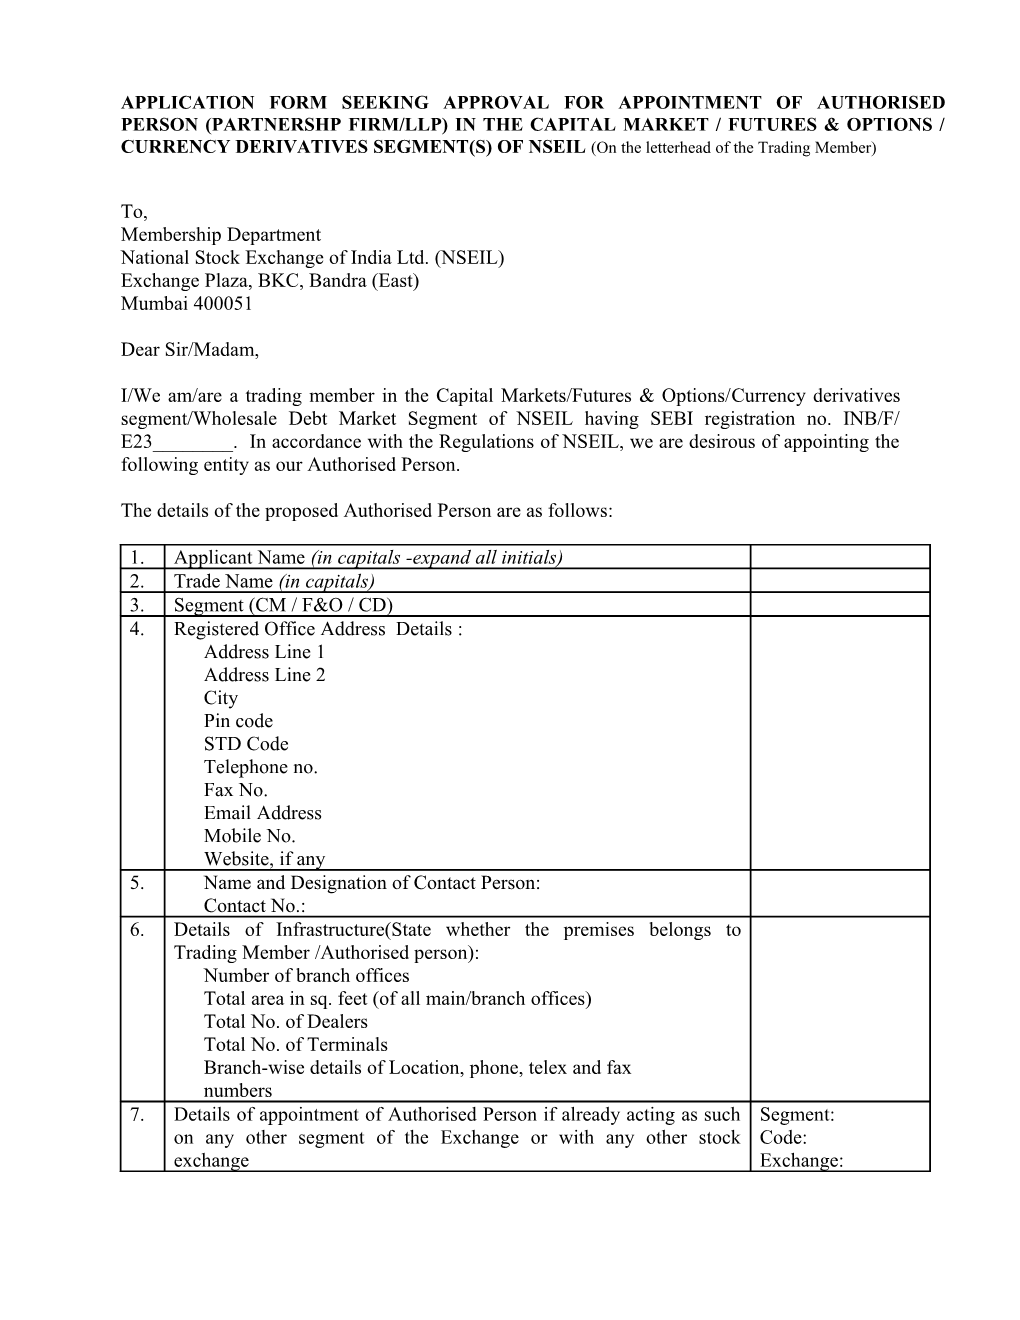 Application Form for Appointment of Authorised Person in the Capital Market / Futures &